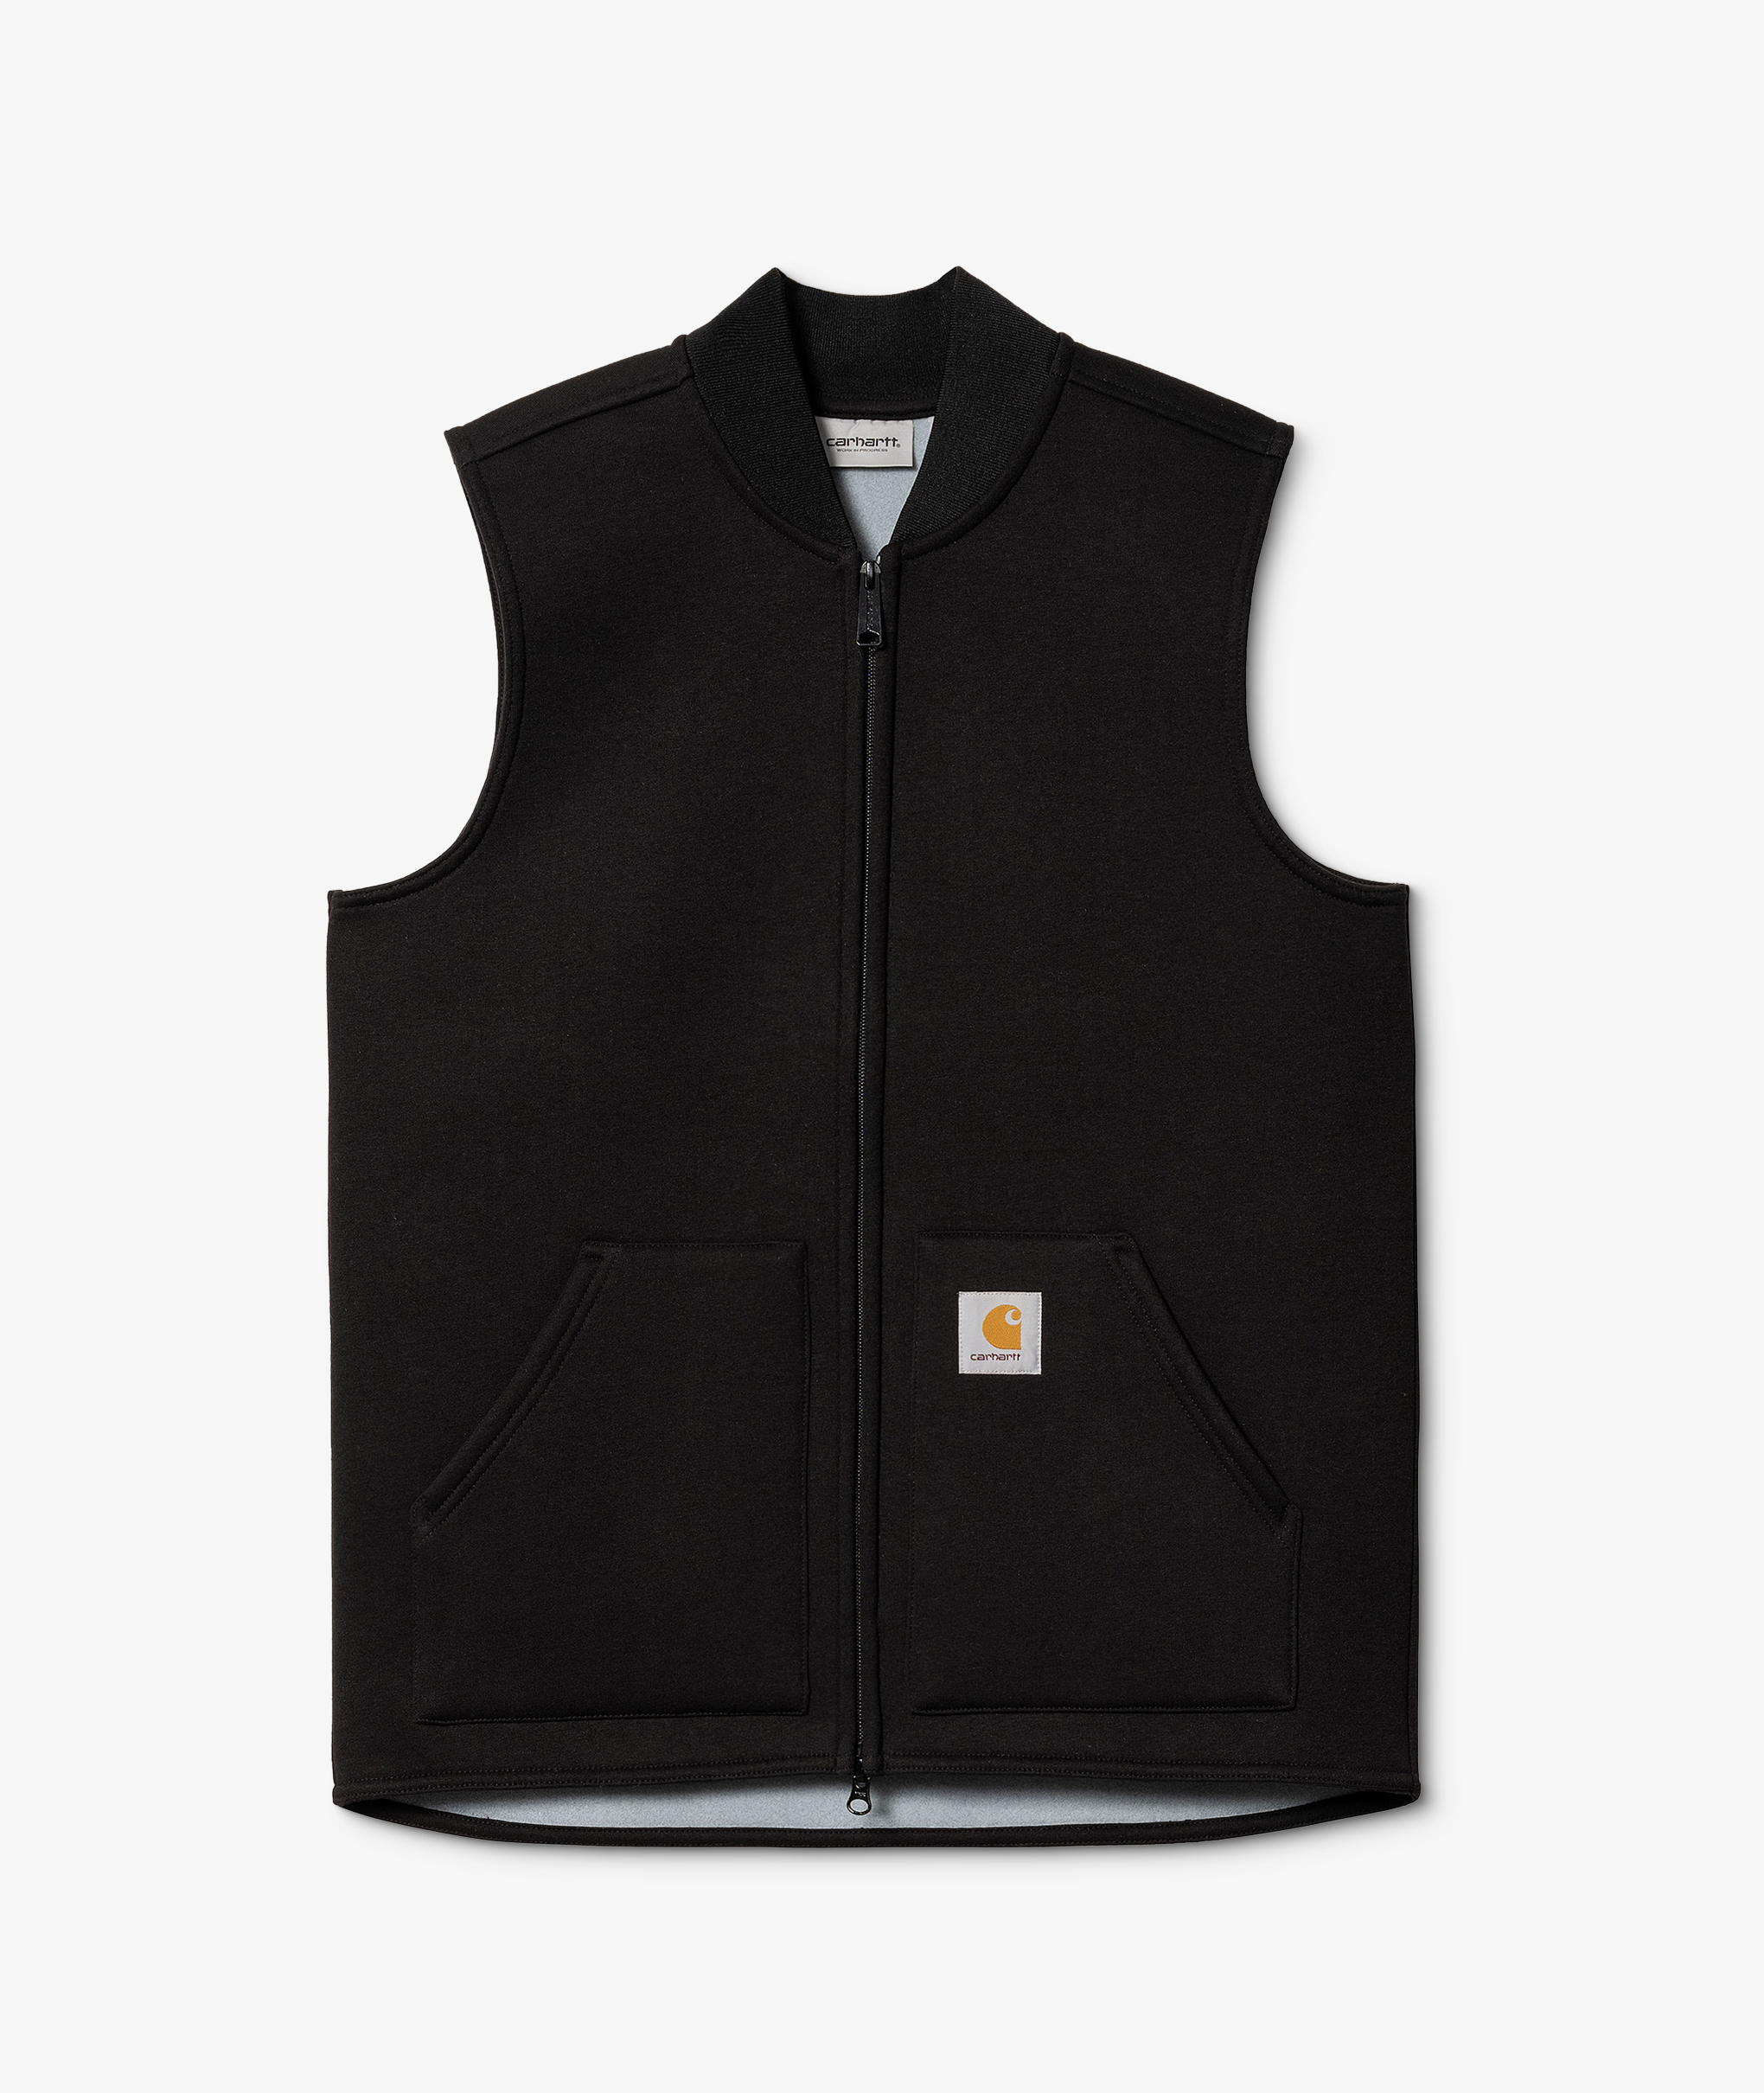 Norse Store | Shipping Worldwide - Carhartt WIP Car-Lux Vest - Black/Grey